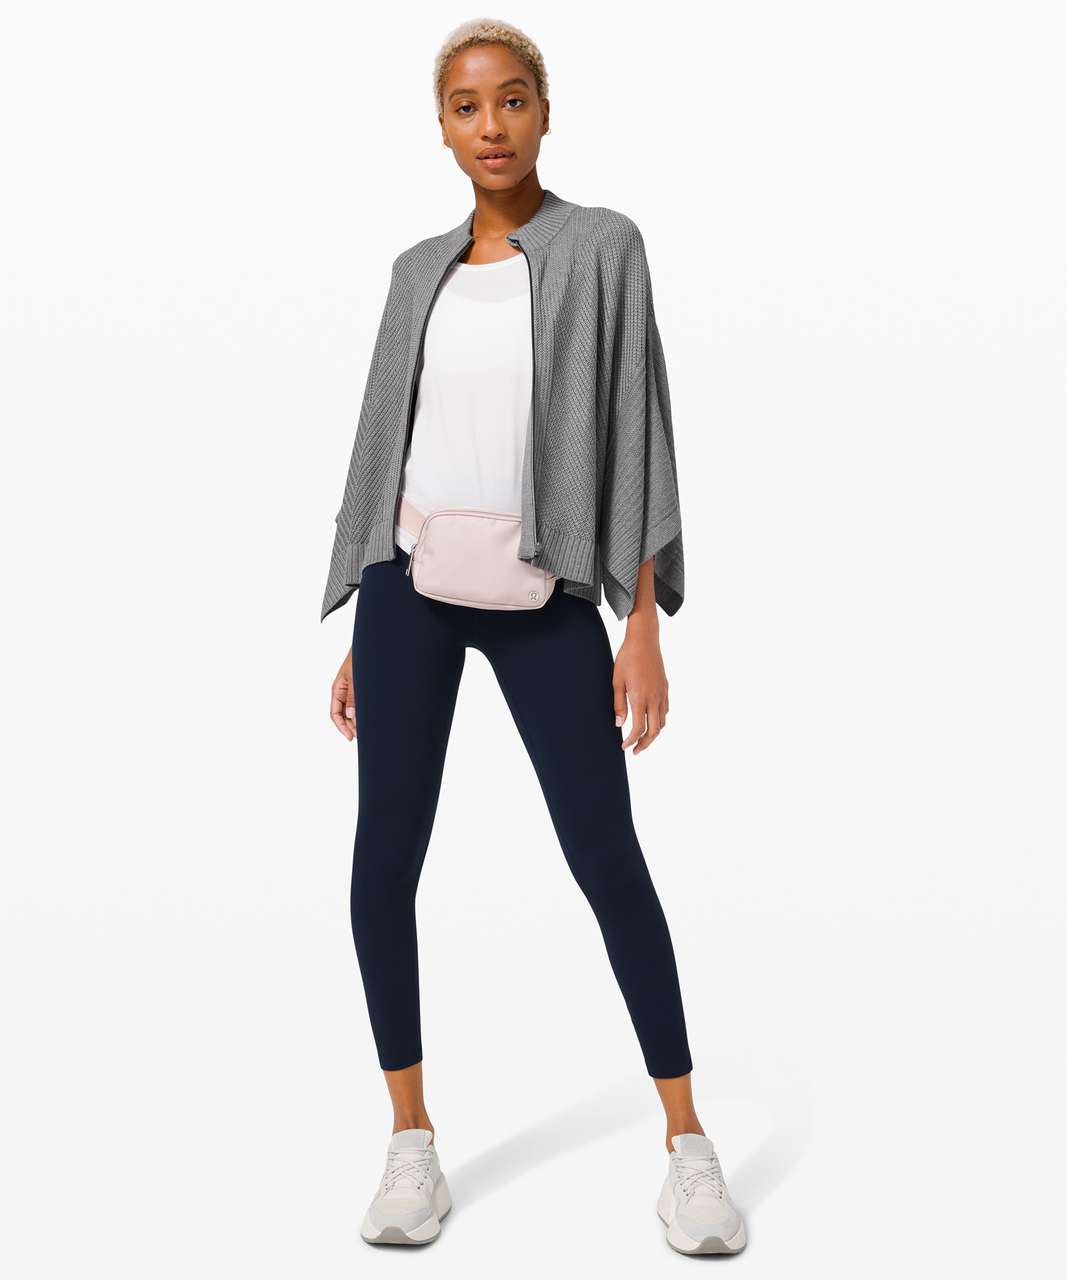 LOFT - Introducing Lou & Grey for LOFT's Signature Softblend—a crazy soft  fabric developed just for you. Once you feel it, you'll find a way to wear  it head-to-toe.